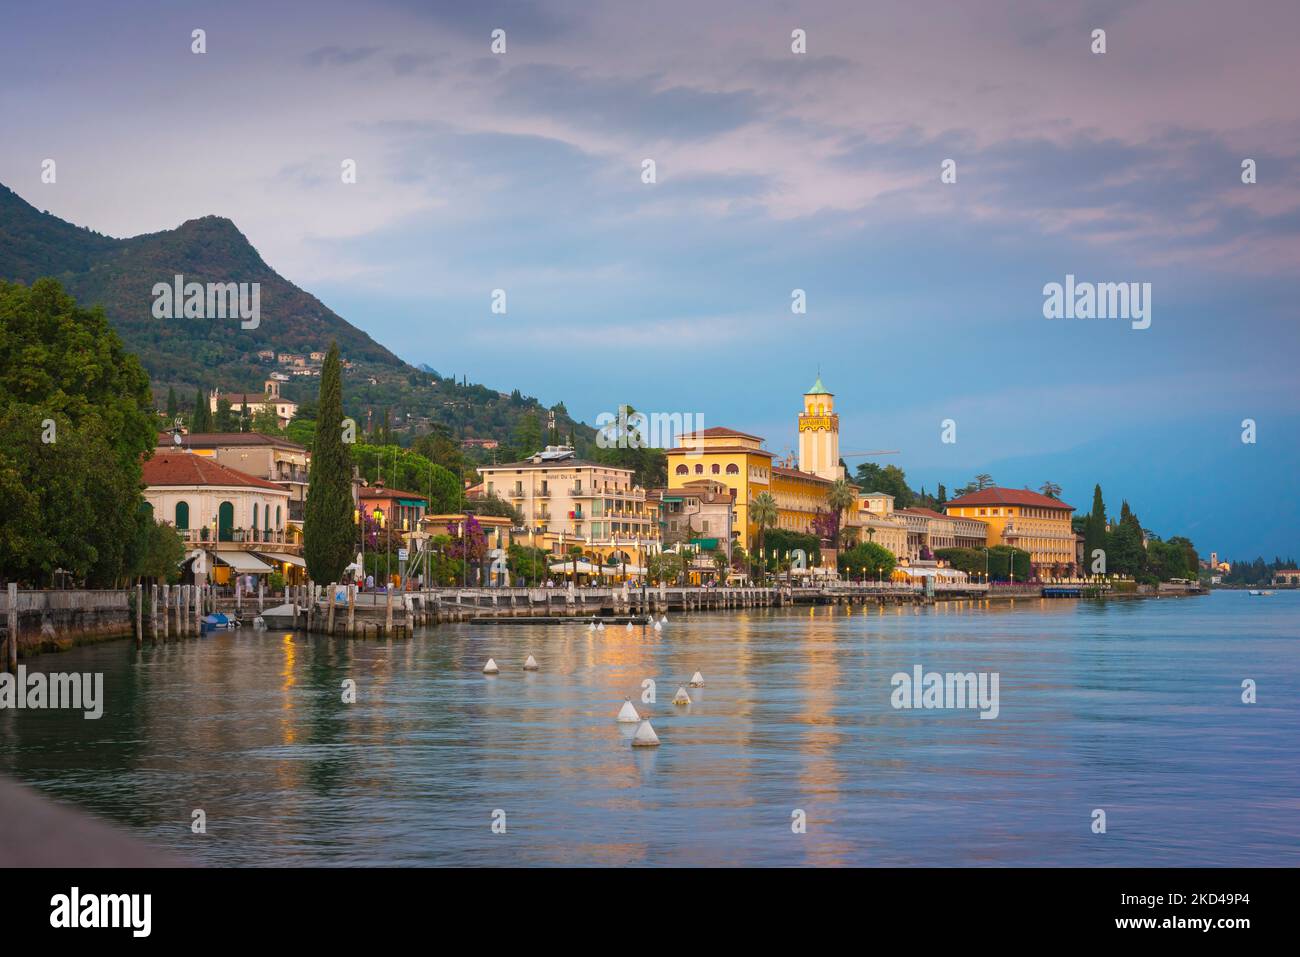 Lake Garda Italy, view at dusk of the scenic lakeside town of Riviera Gardone sited on the south-west side of the lake, Lake Garda, Lombardy, Italy Stock Photo